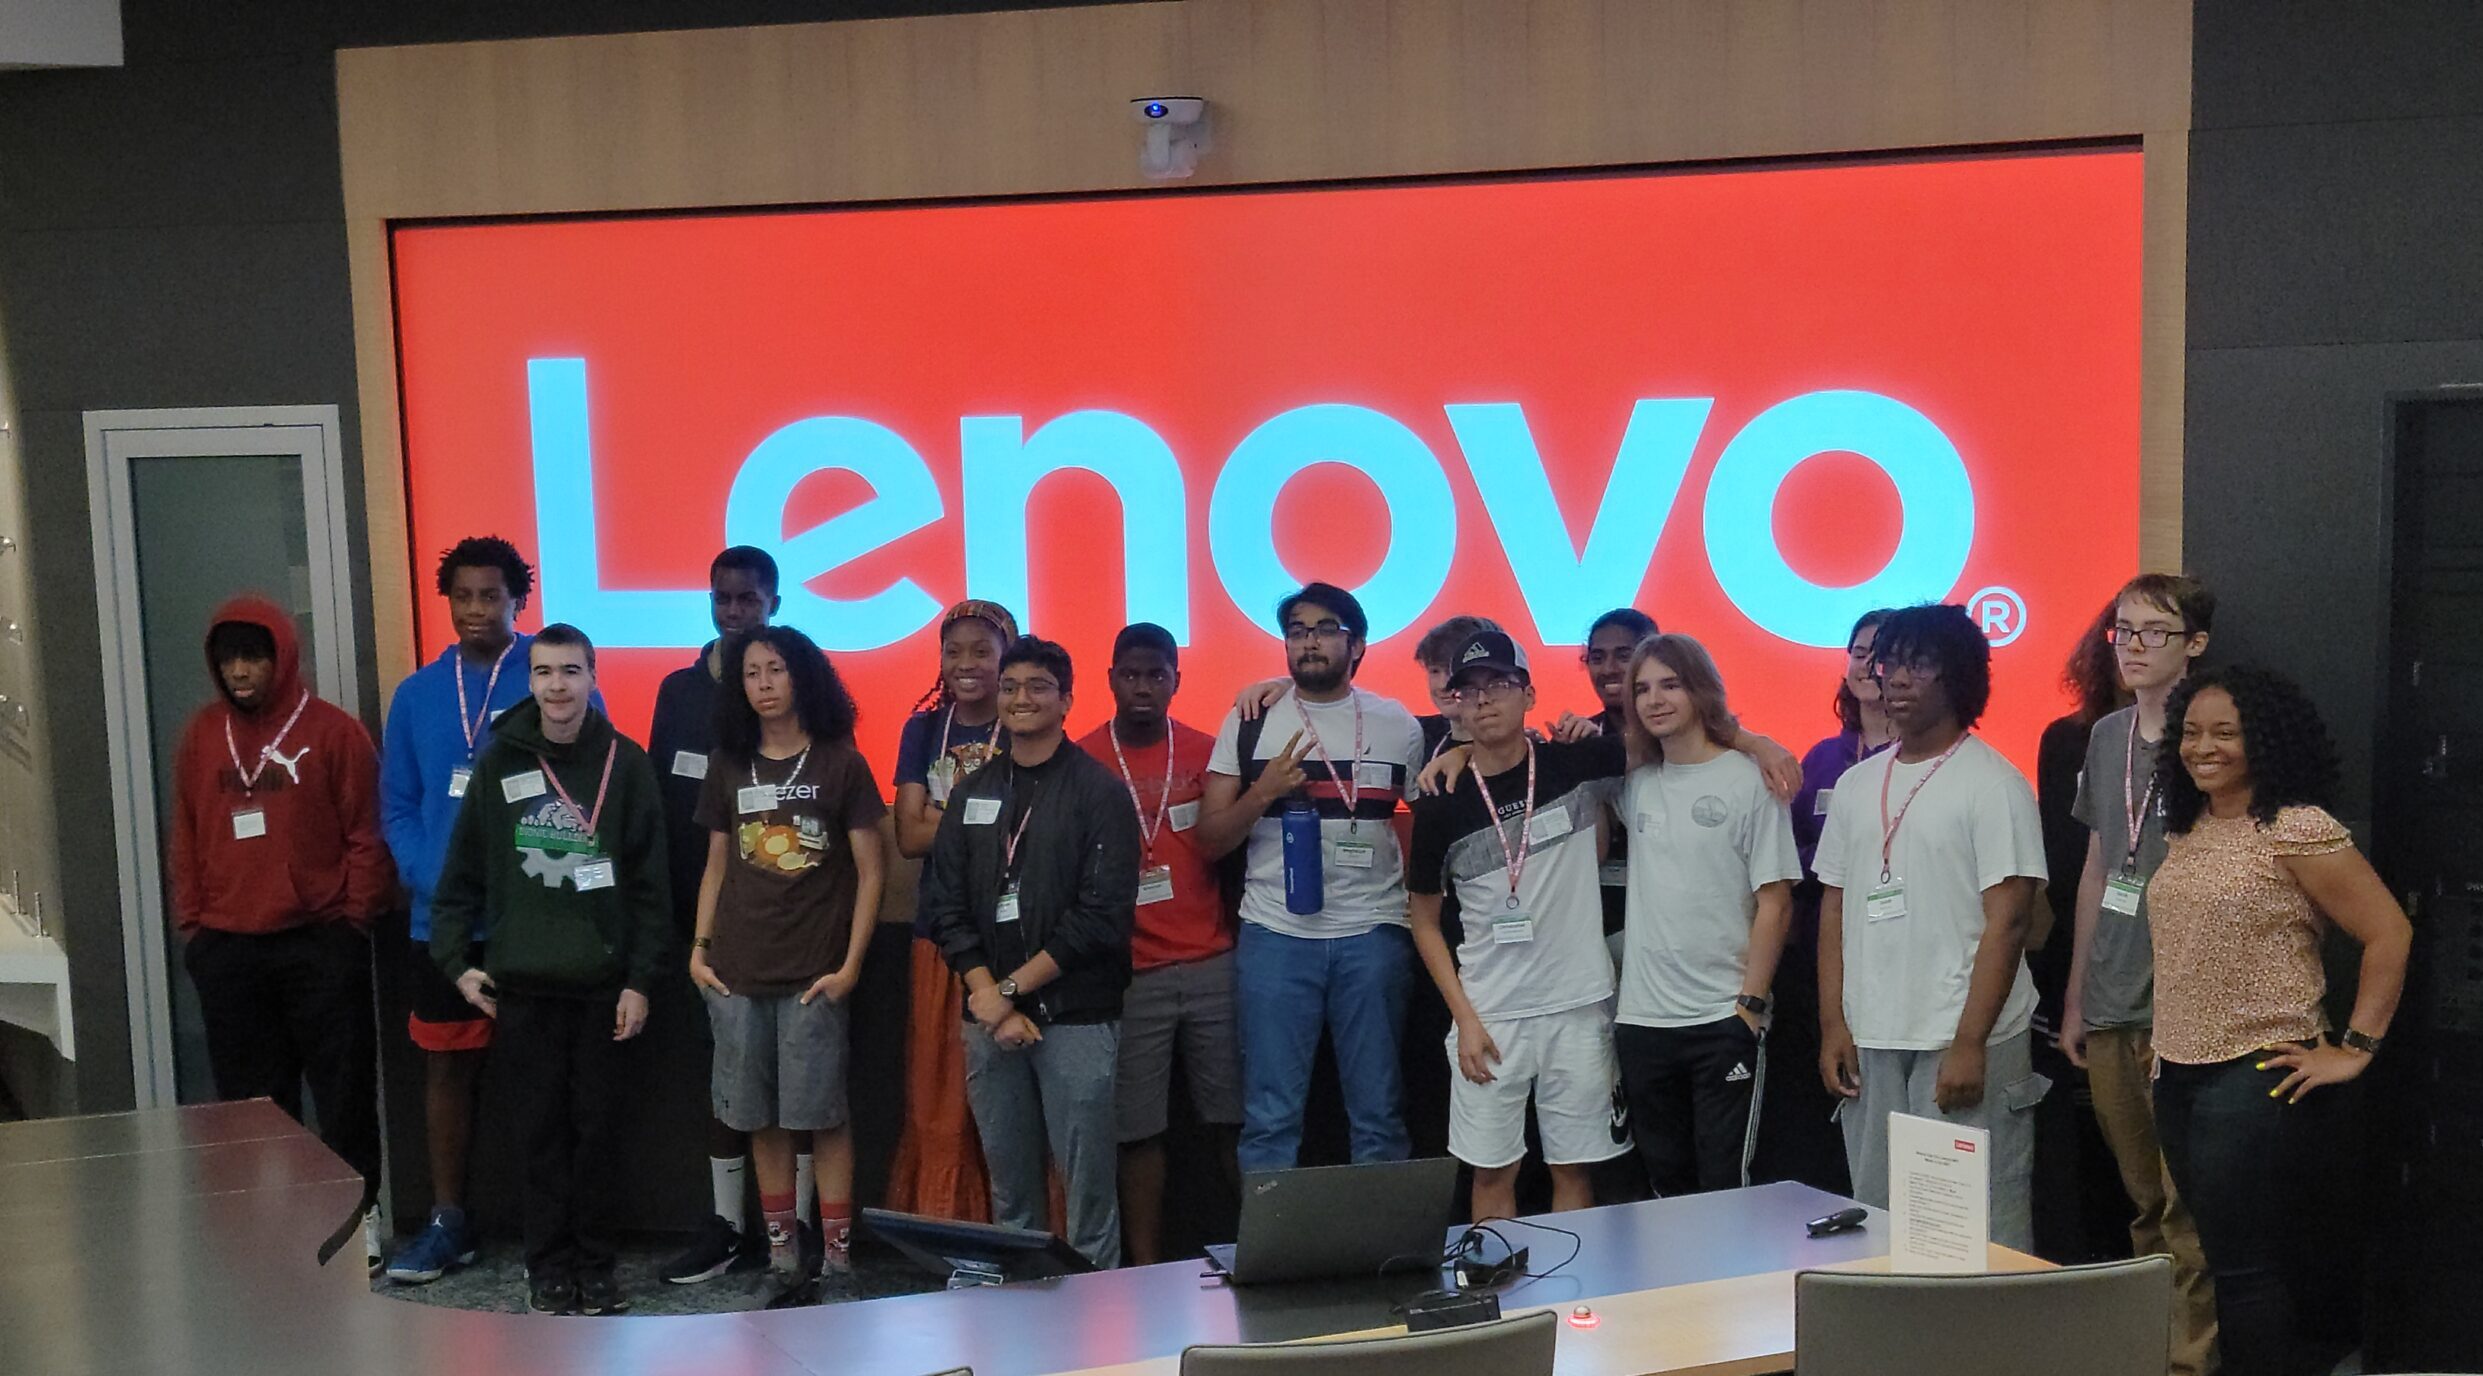 A group of high school students stand in front of a screen that shows the Lenovo logo